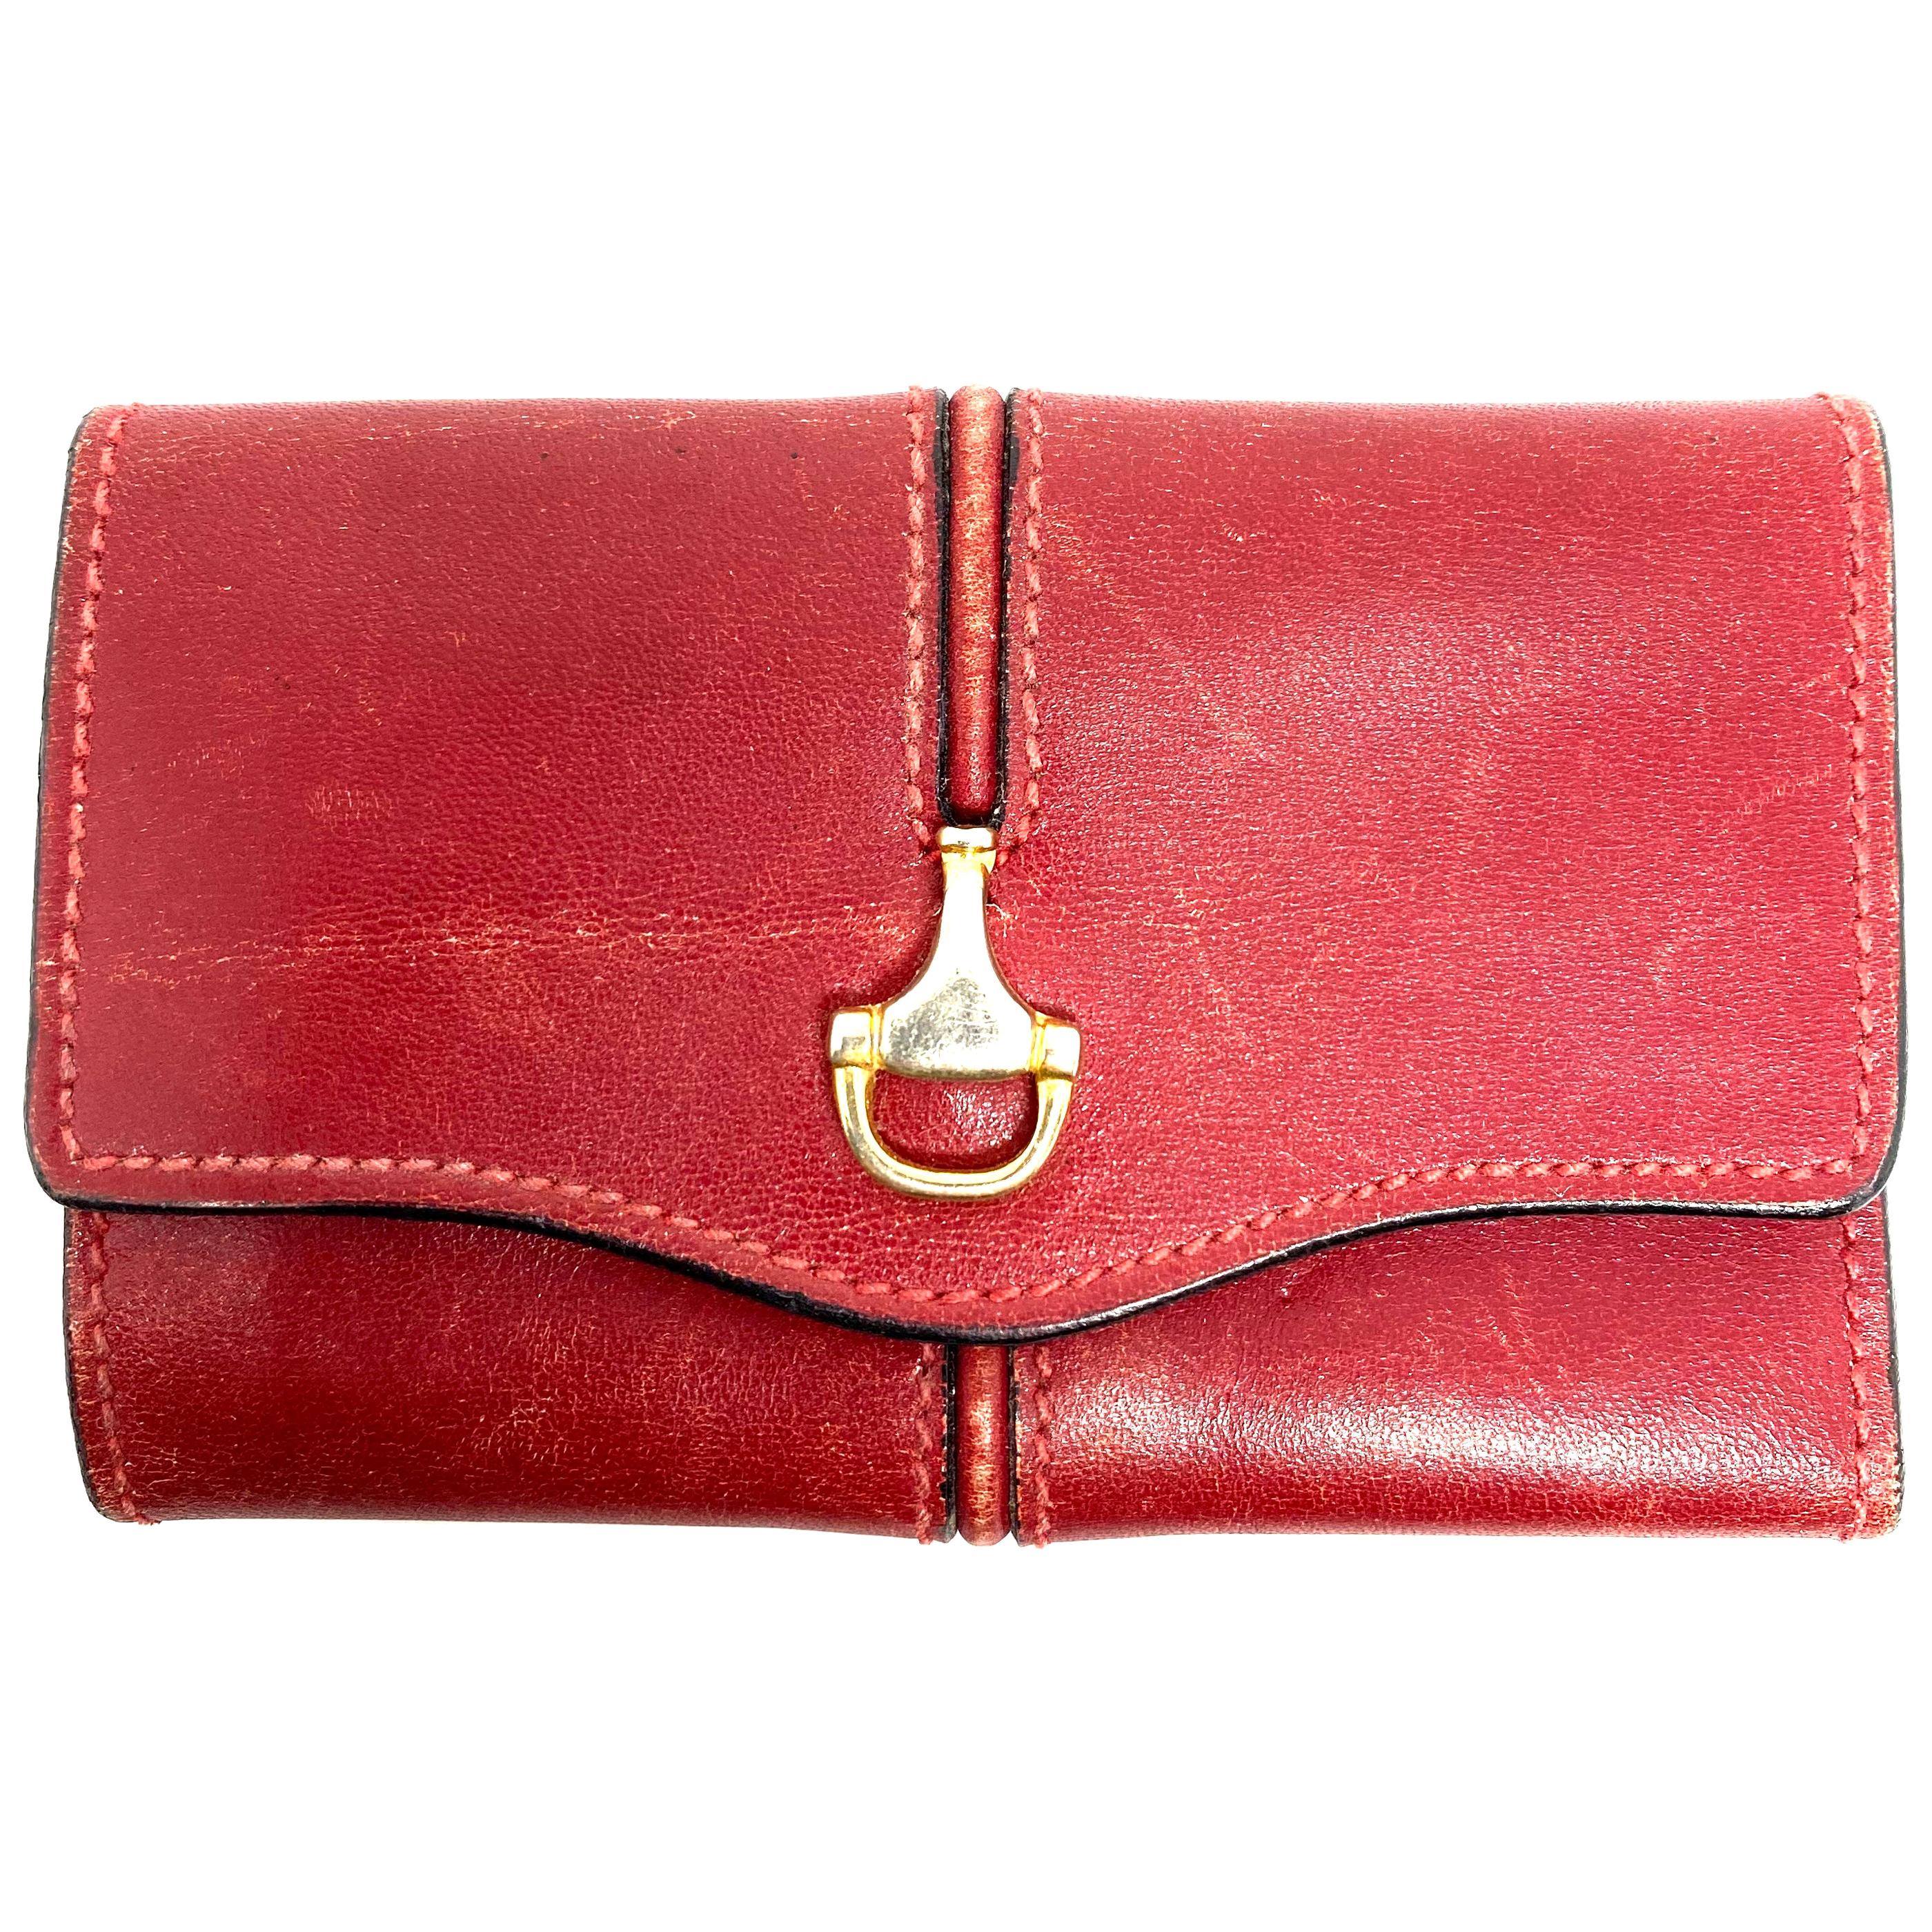 1960s GUCCI Red Leather Key Holder Tri- Fold Wallet 